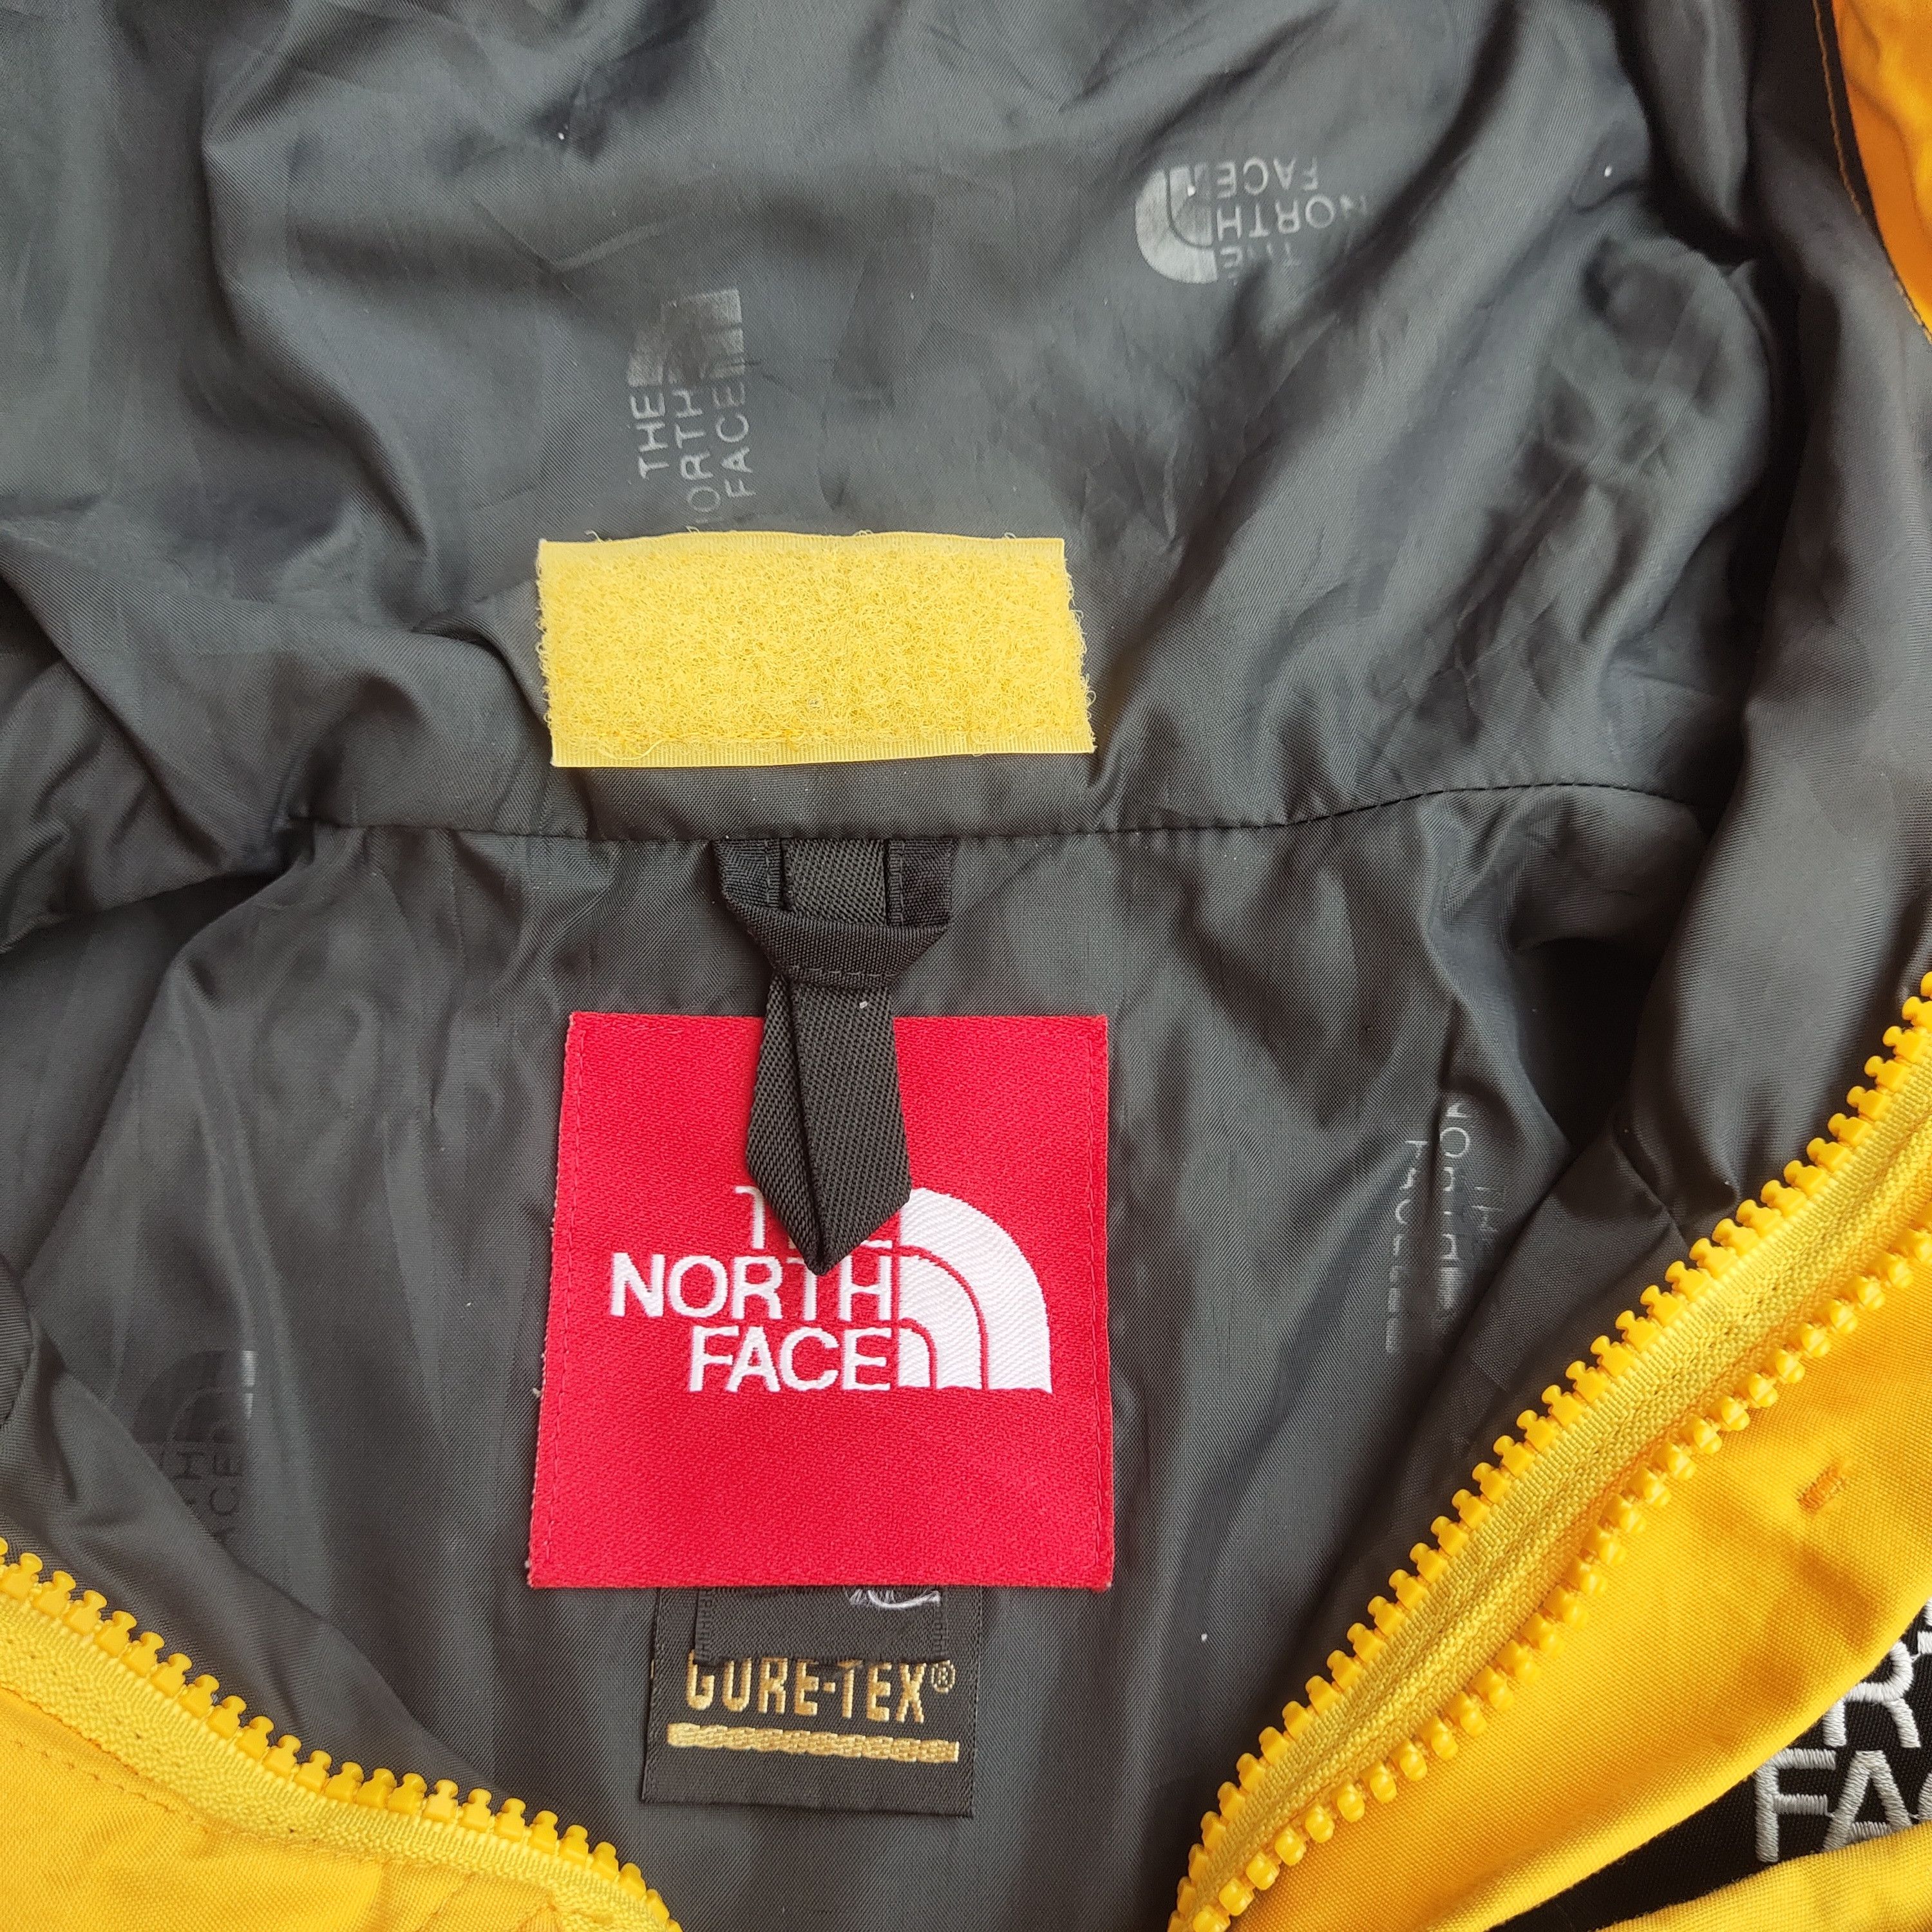 The North Face Vintage North Face Gore-Tex Yellow Jacket Size US M / EU 48-50 / 2 - 6 Thumbnail